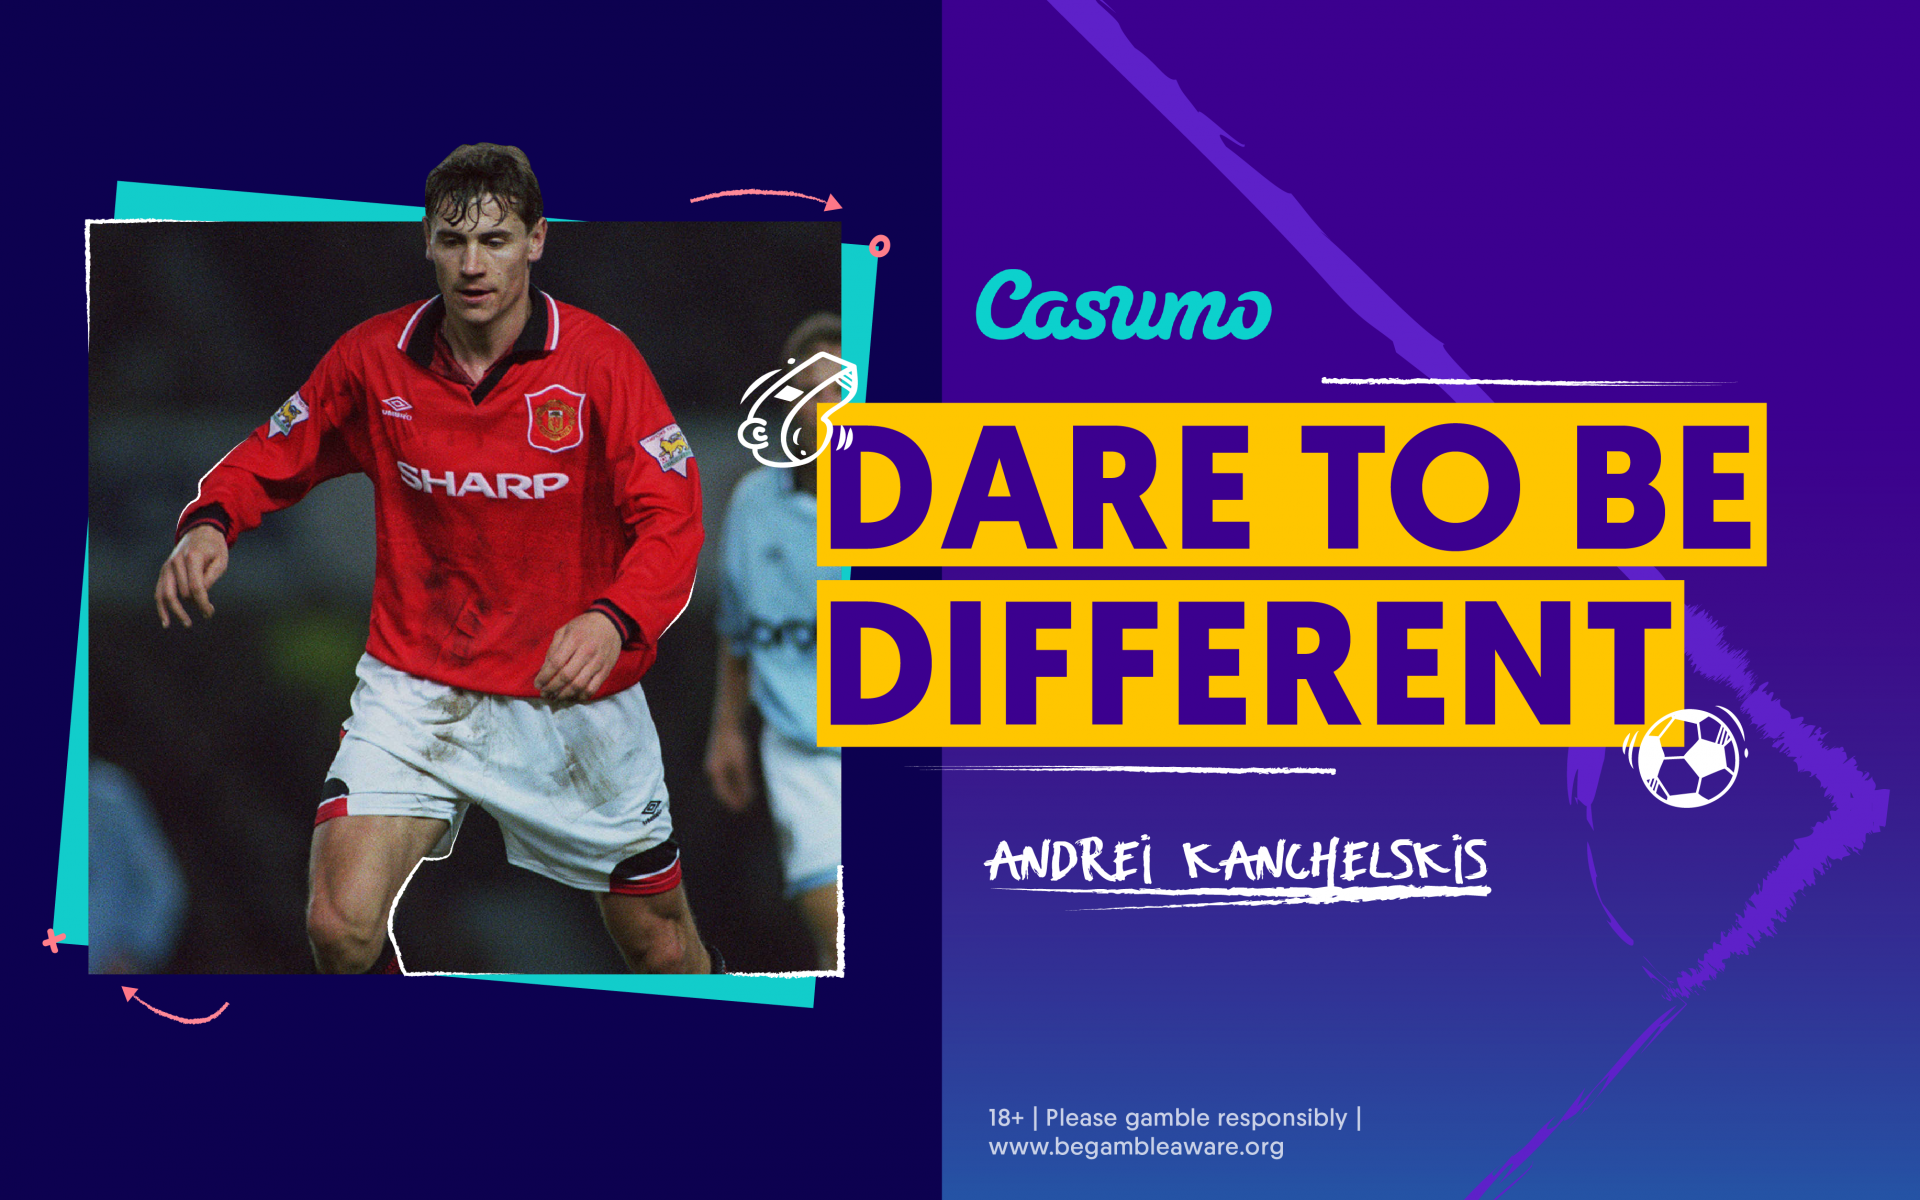 Dare To Be Different with Andrei Kanchelskis: My story